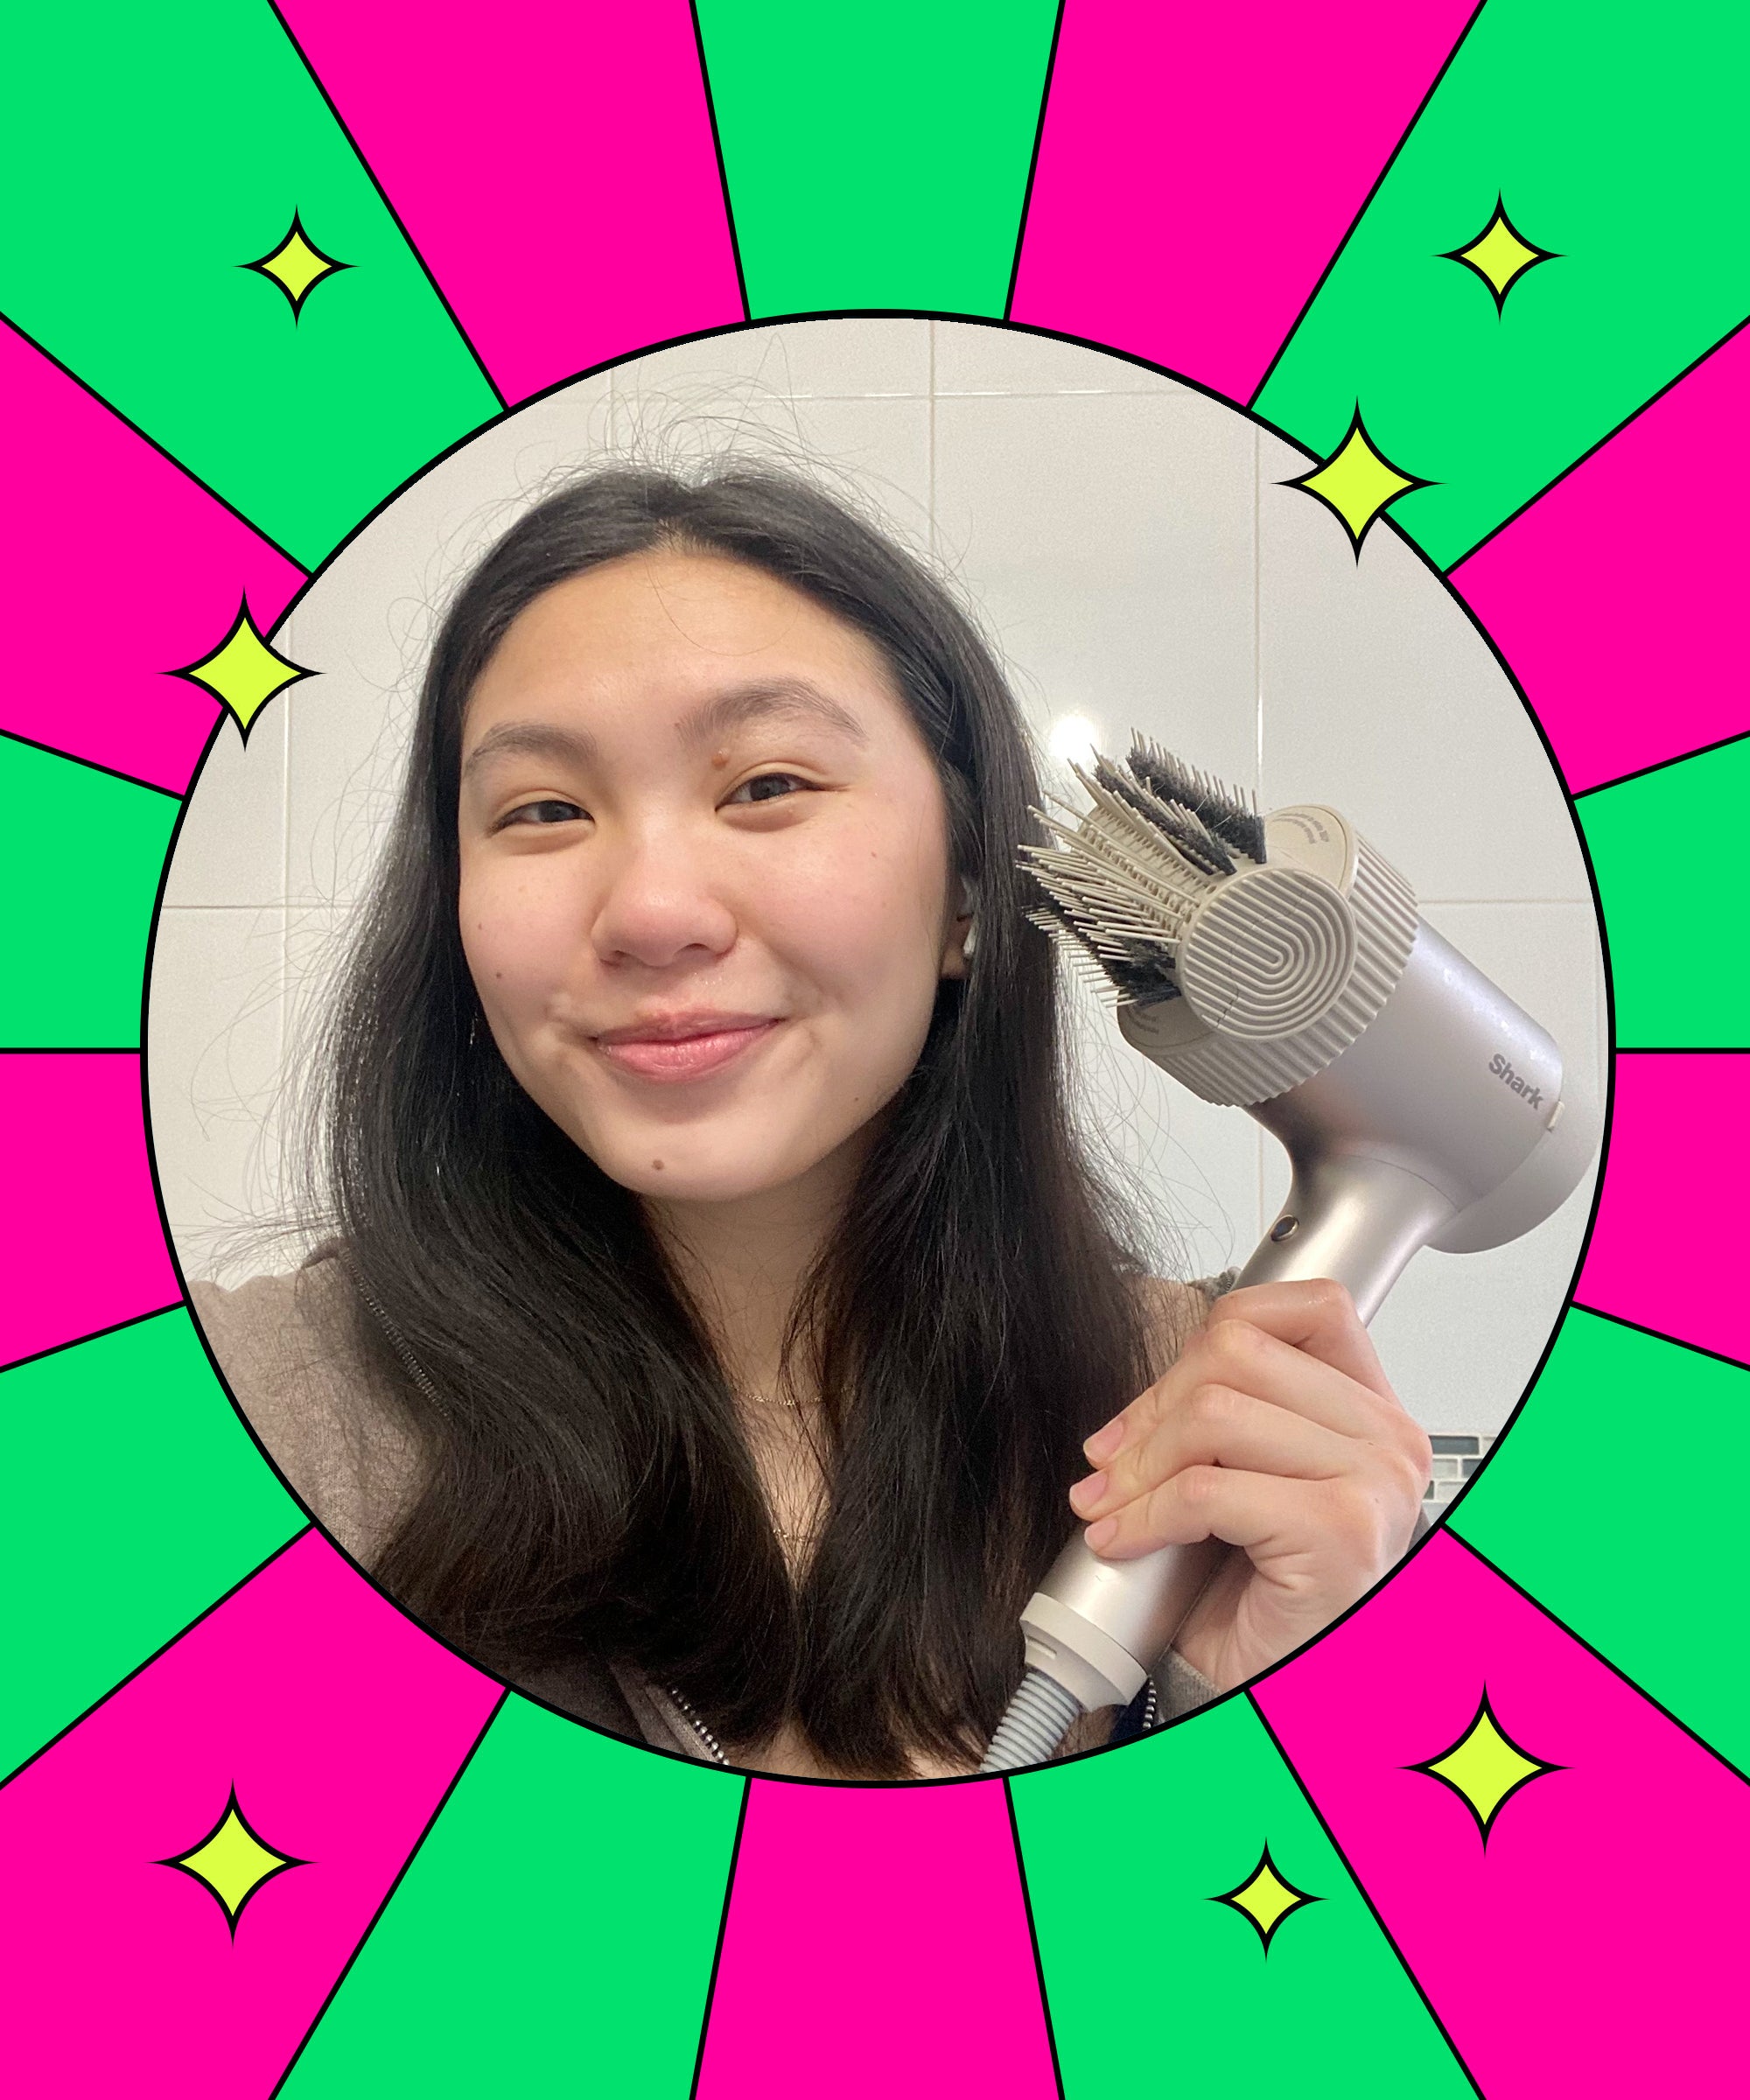 Shark FlexStyle Air Styler & Hair Dryer review: The first real